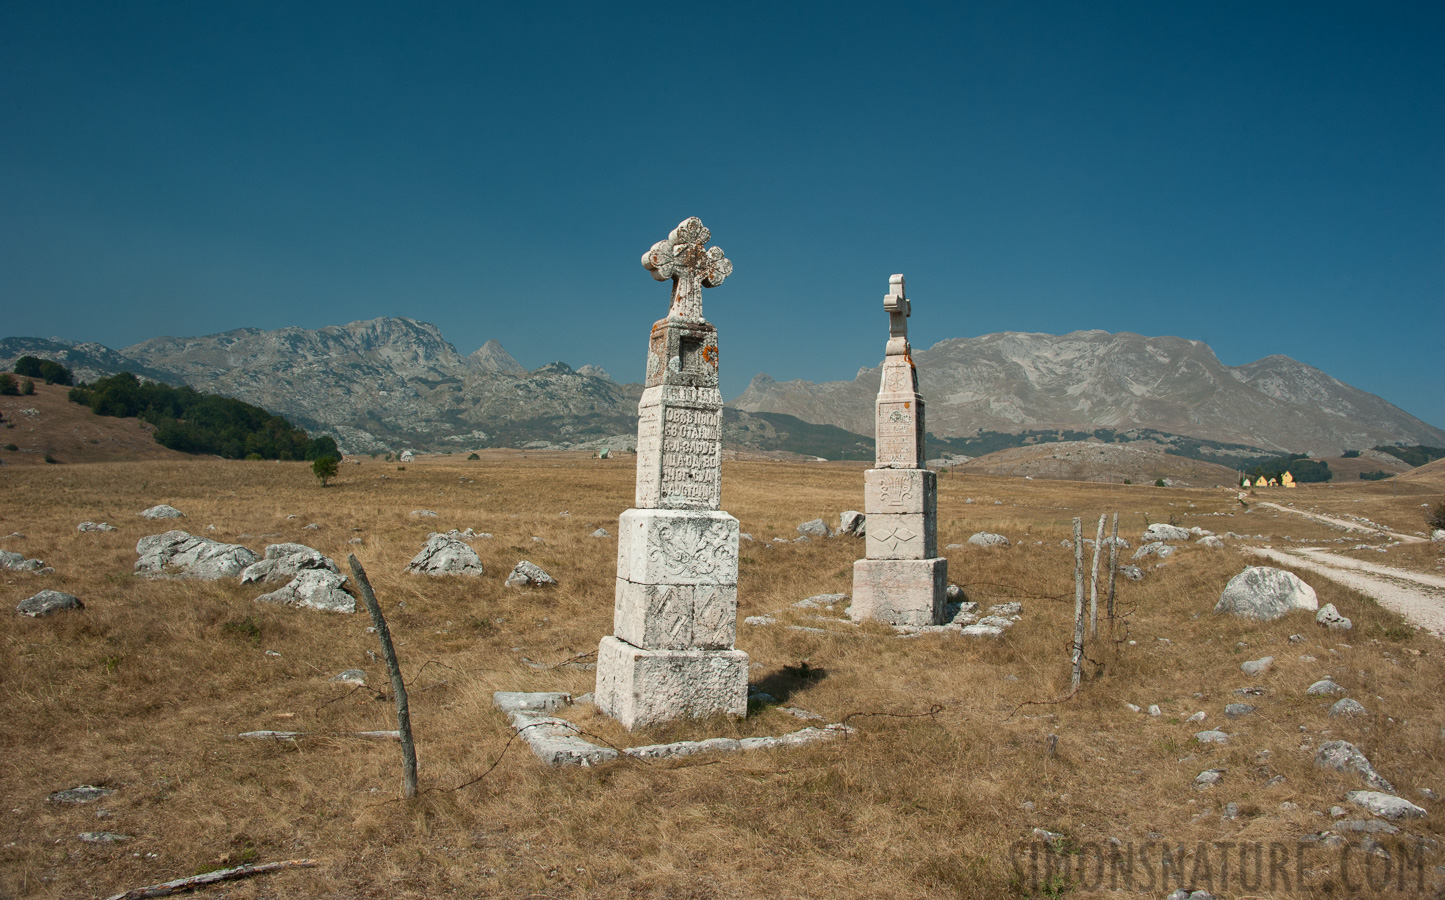 Montenegro - In the region of the Durmitor massif [28 mm, 1/200 sec at f / 14, ISO 400]